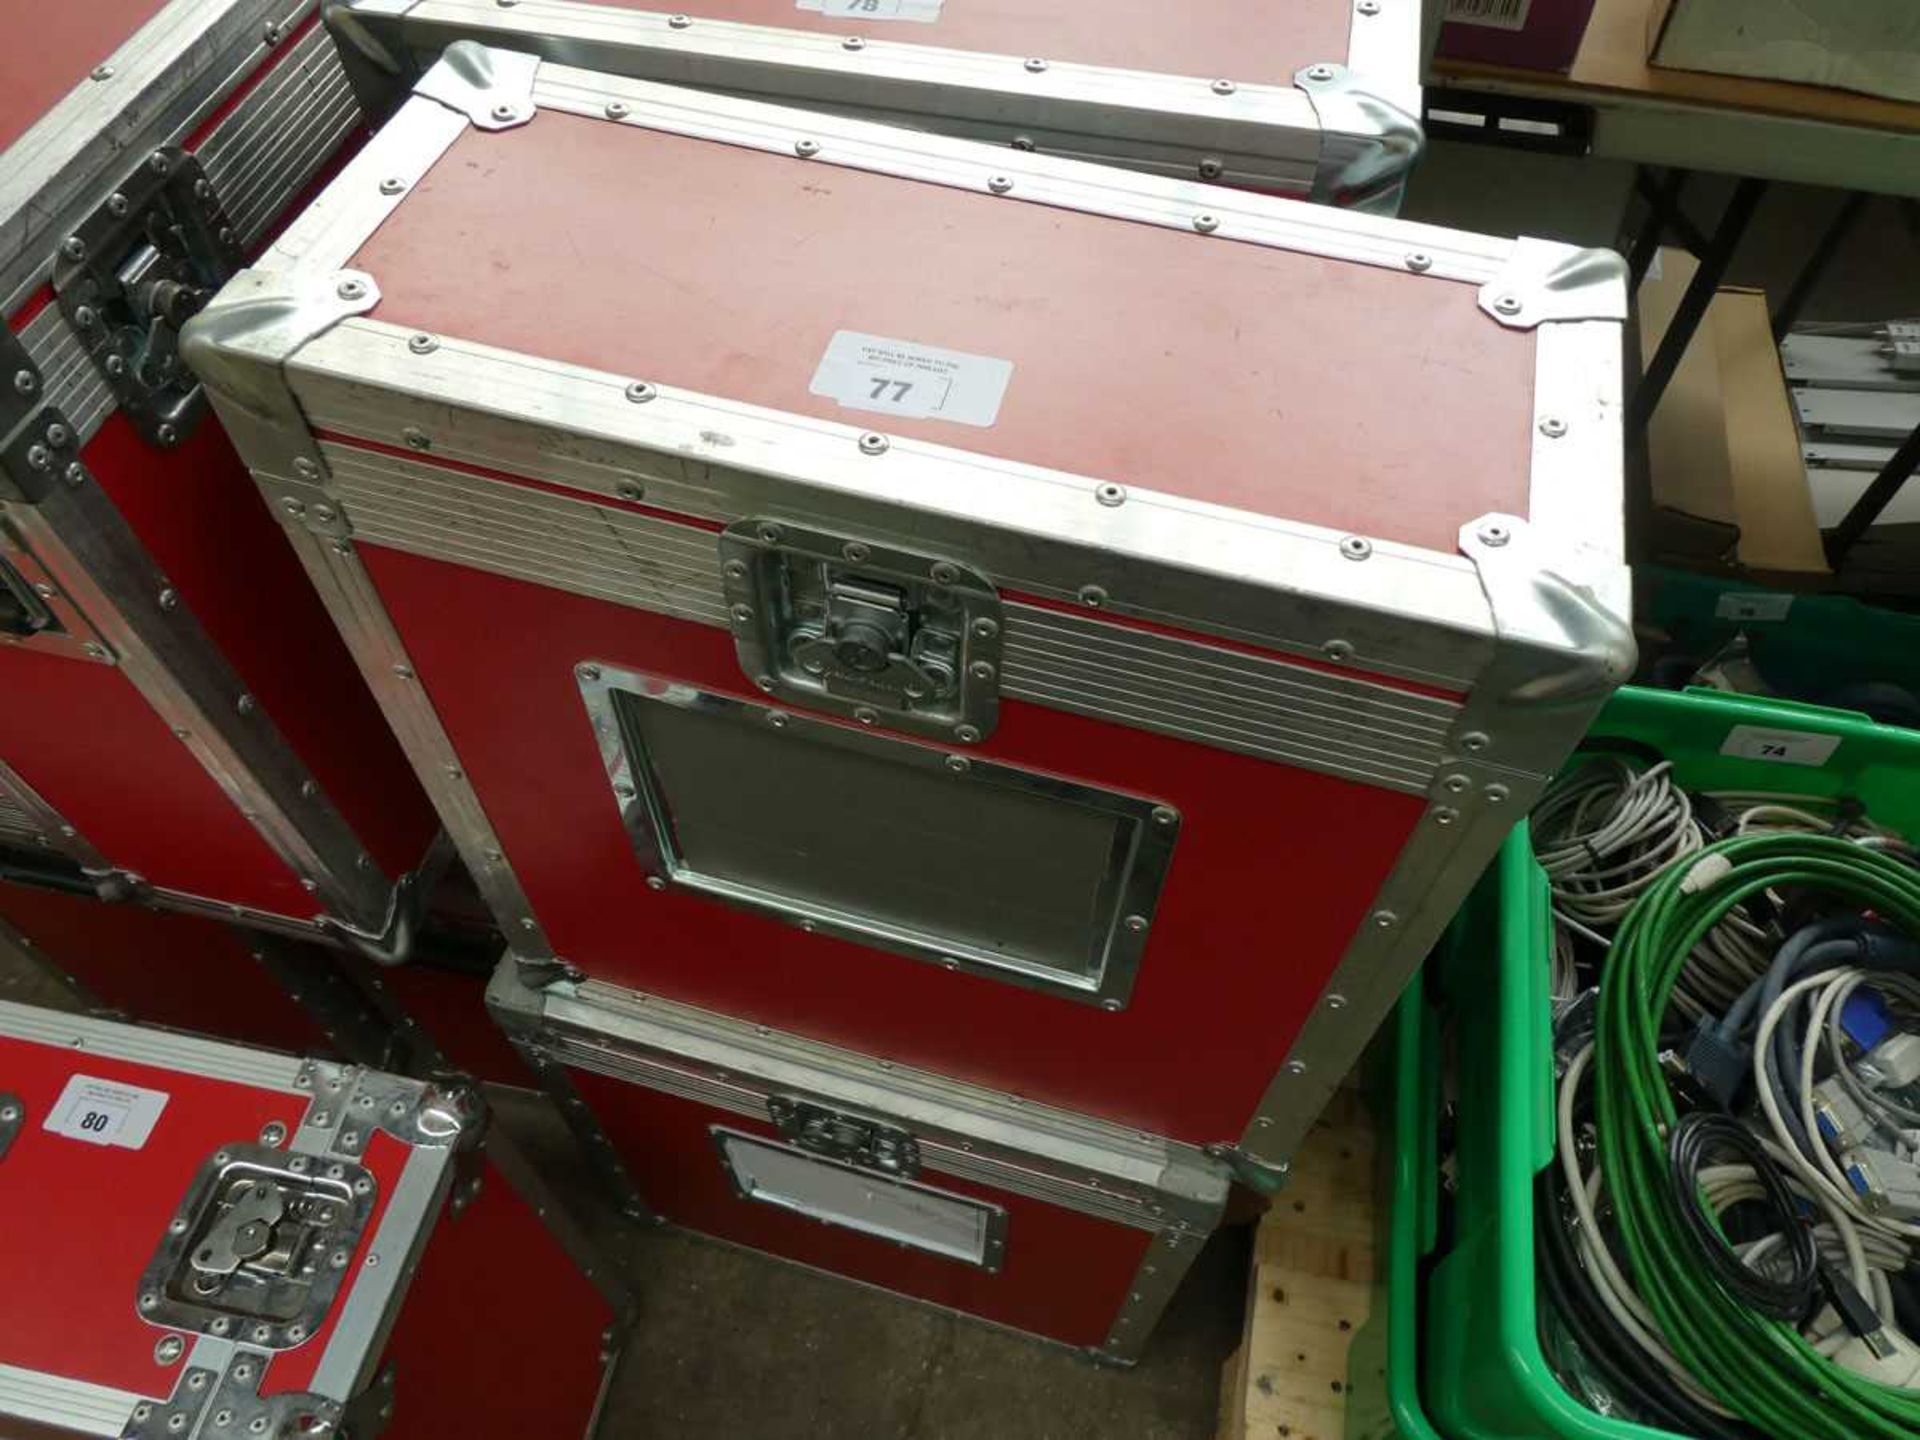 +VAT 2 red padded flight cases each with a 17" monitor